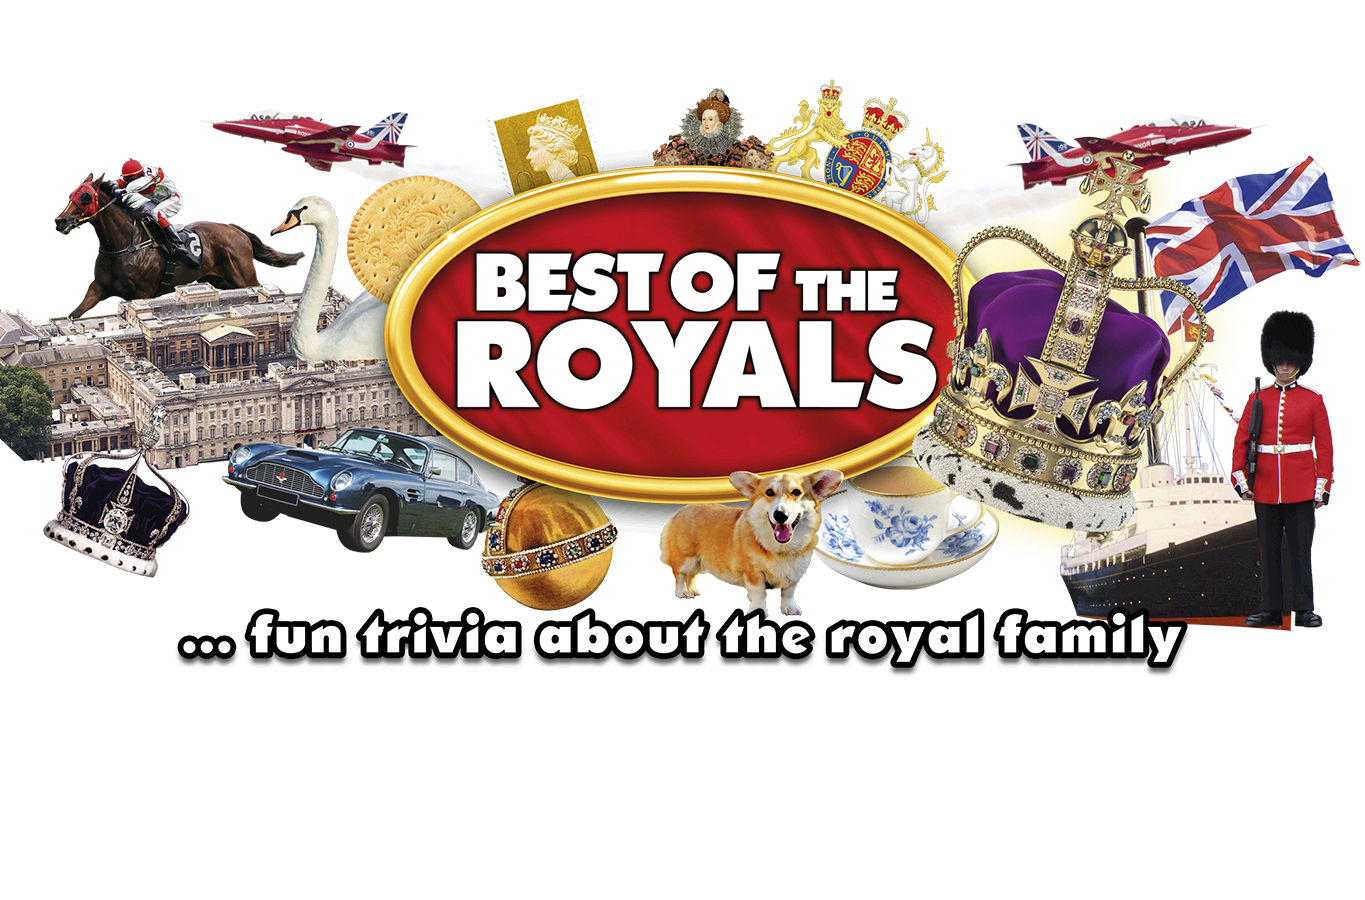 Best of the Royals